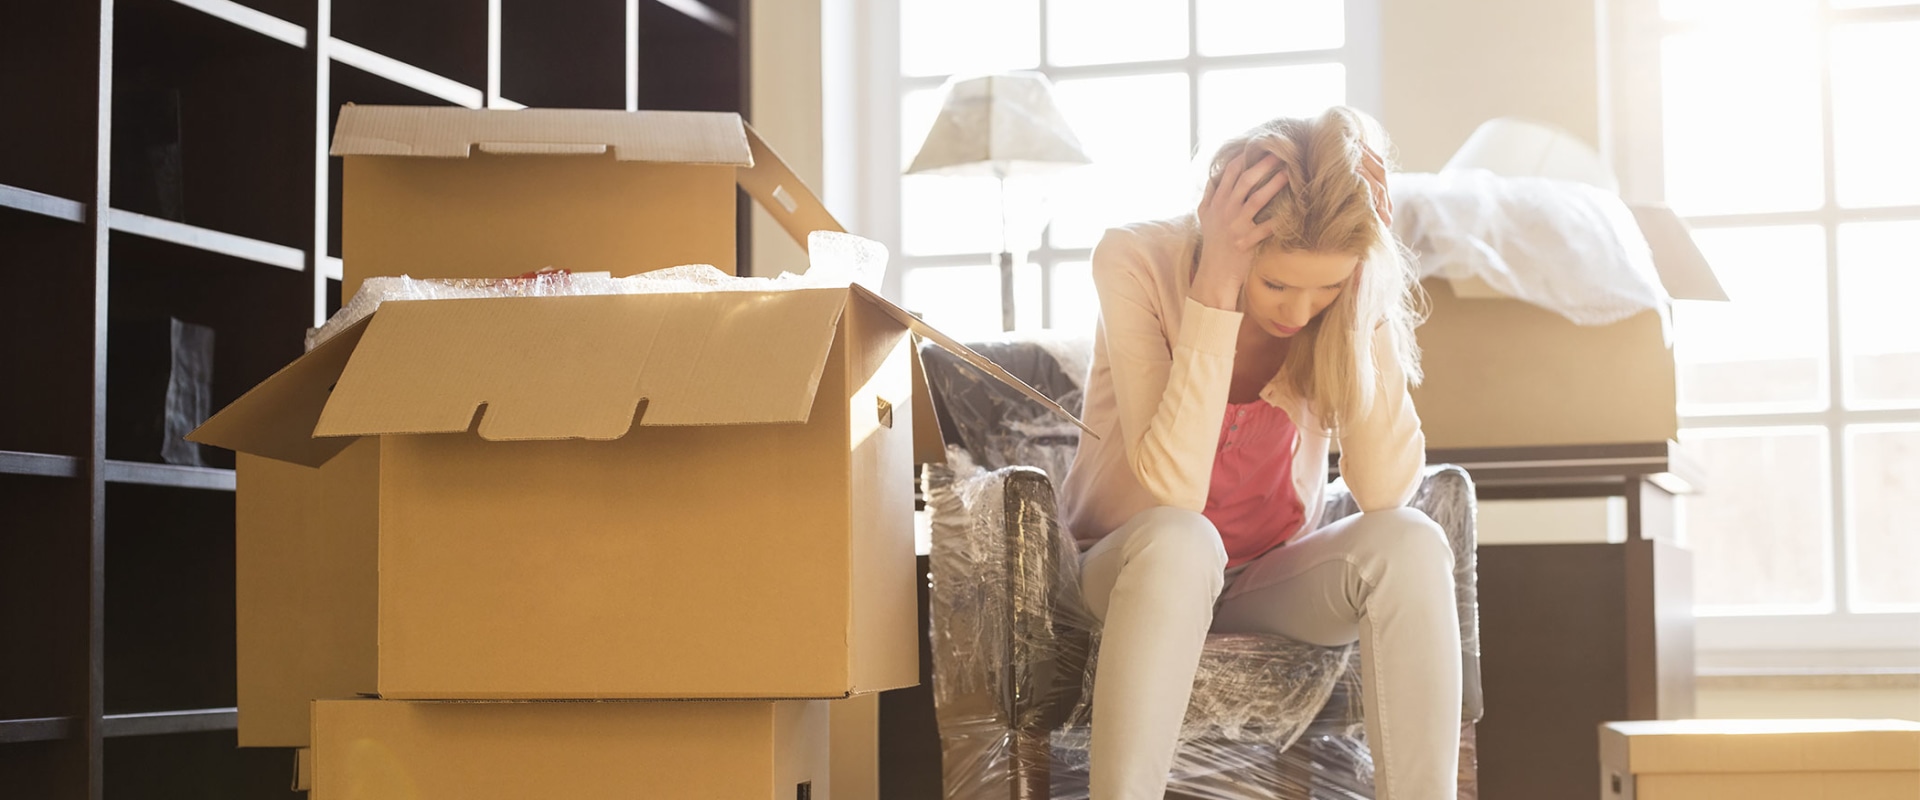 Coping with the Emotions of Relocation